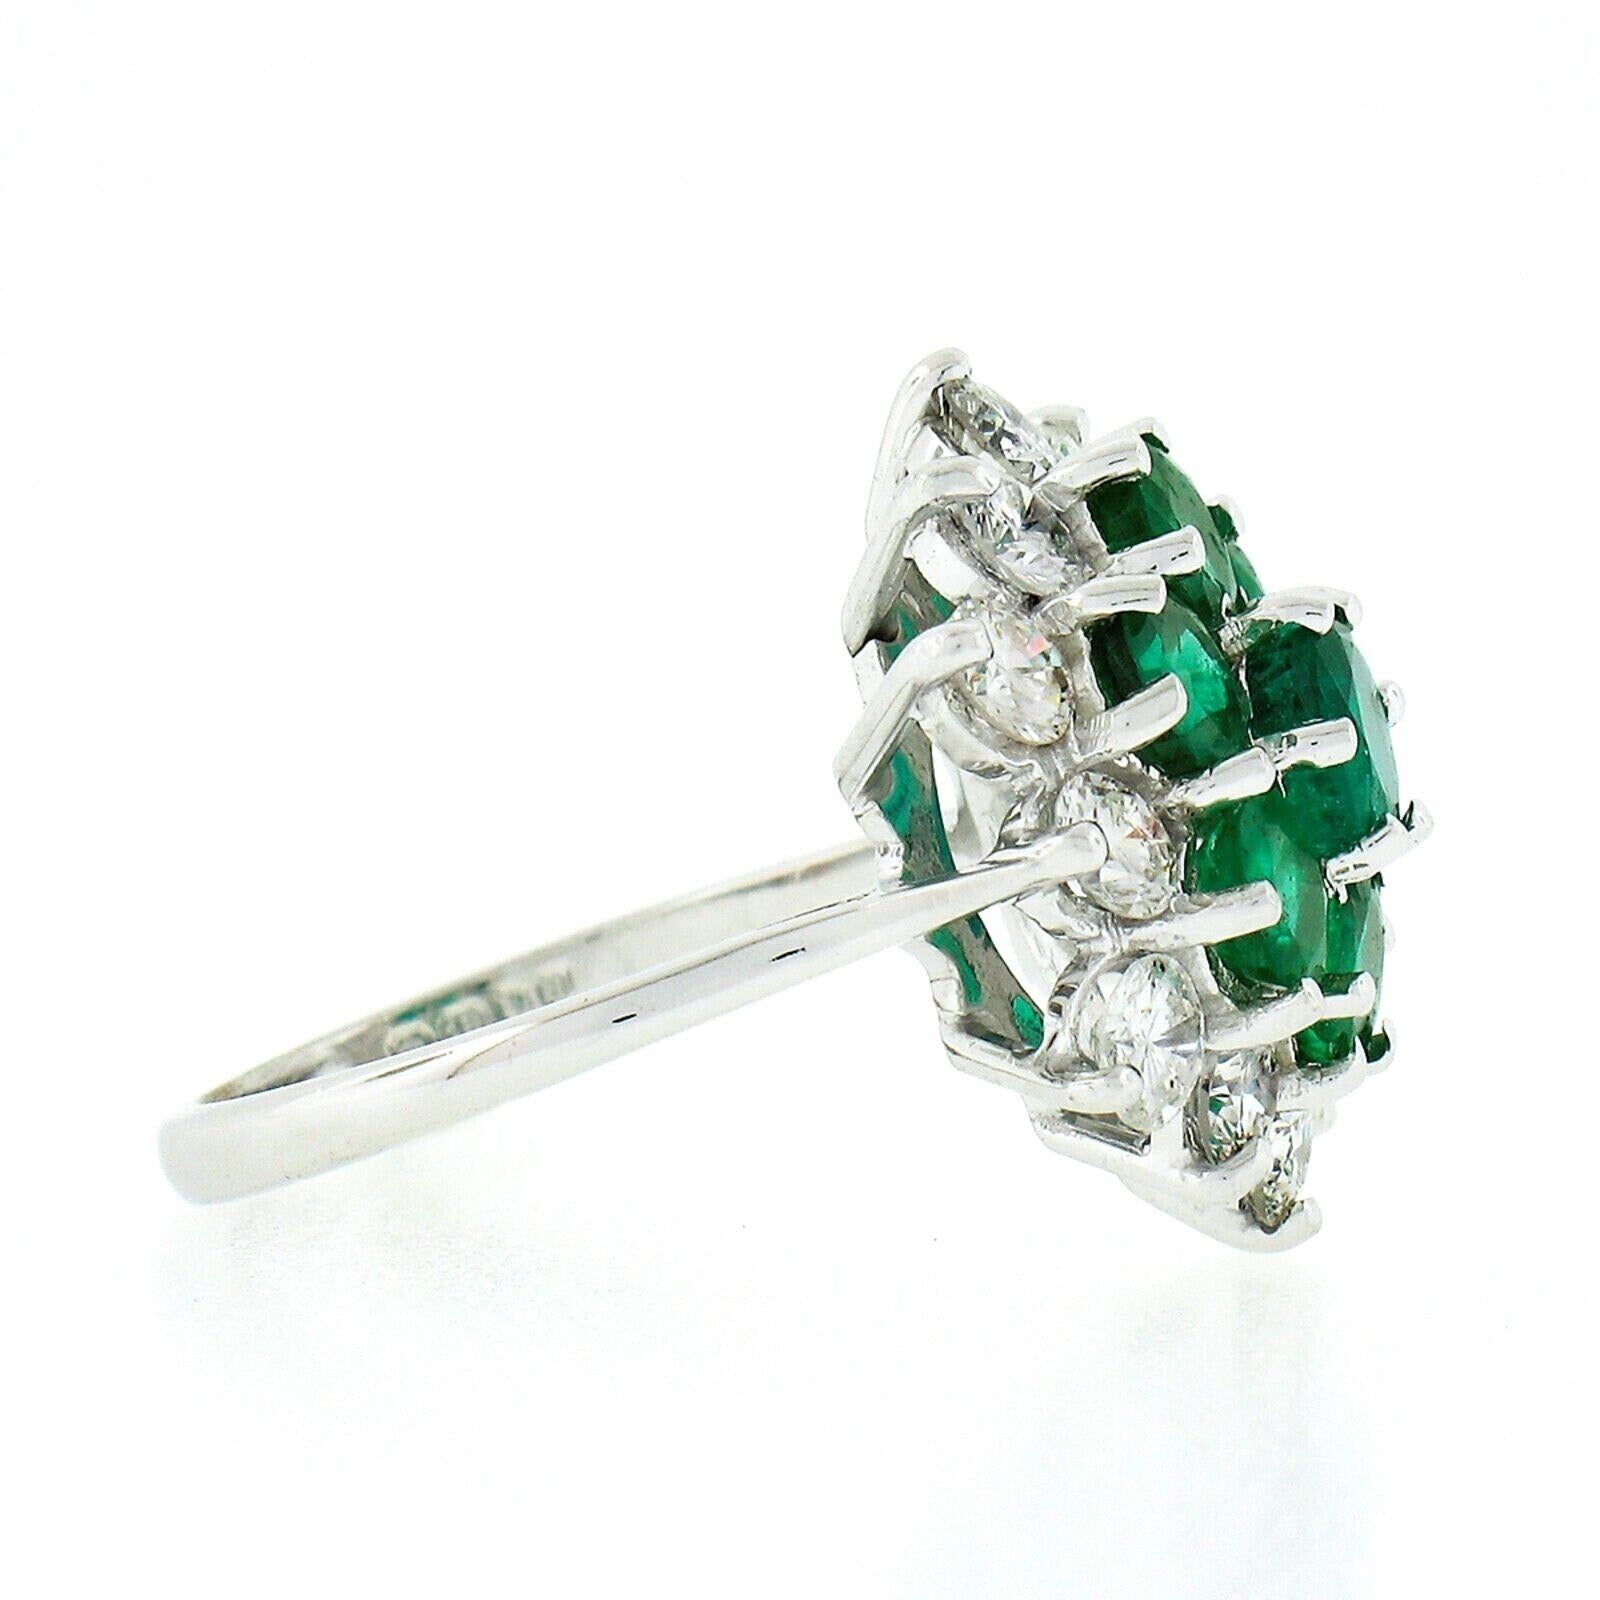 Vintage 18k White Gold 3.75ct Round Diamond Emerald Cluster Flower Cocktail Ring In Good Condition For Sale In Montclair, NJ